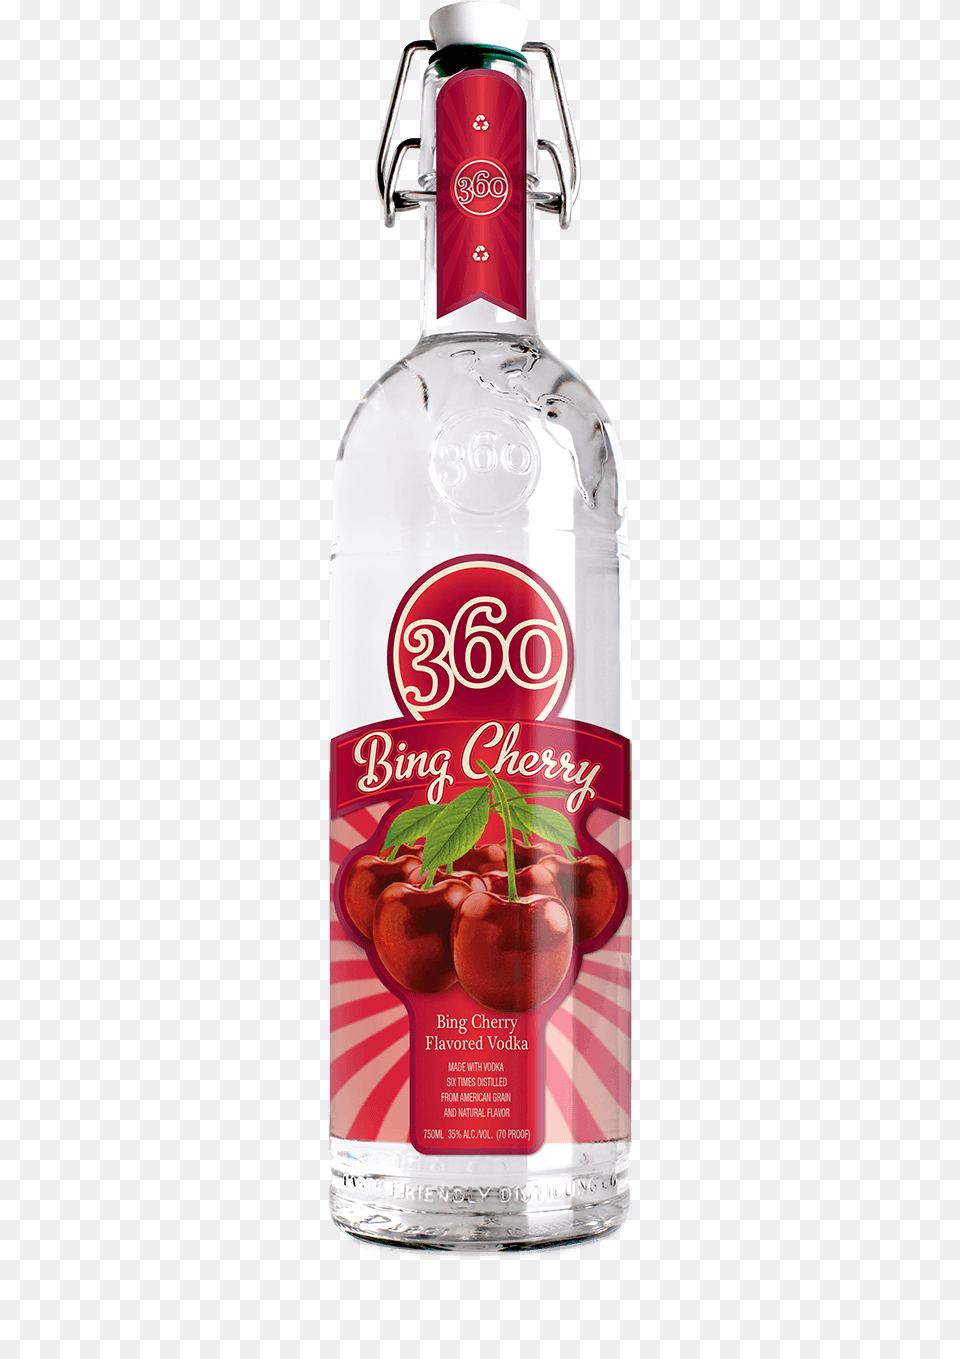 Red Delicious Apple Vodka, Beverage, Alcohol, Liquor, Gin Free Png Download